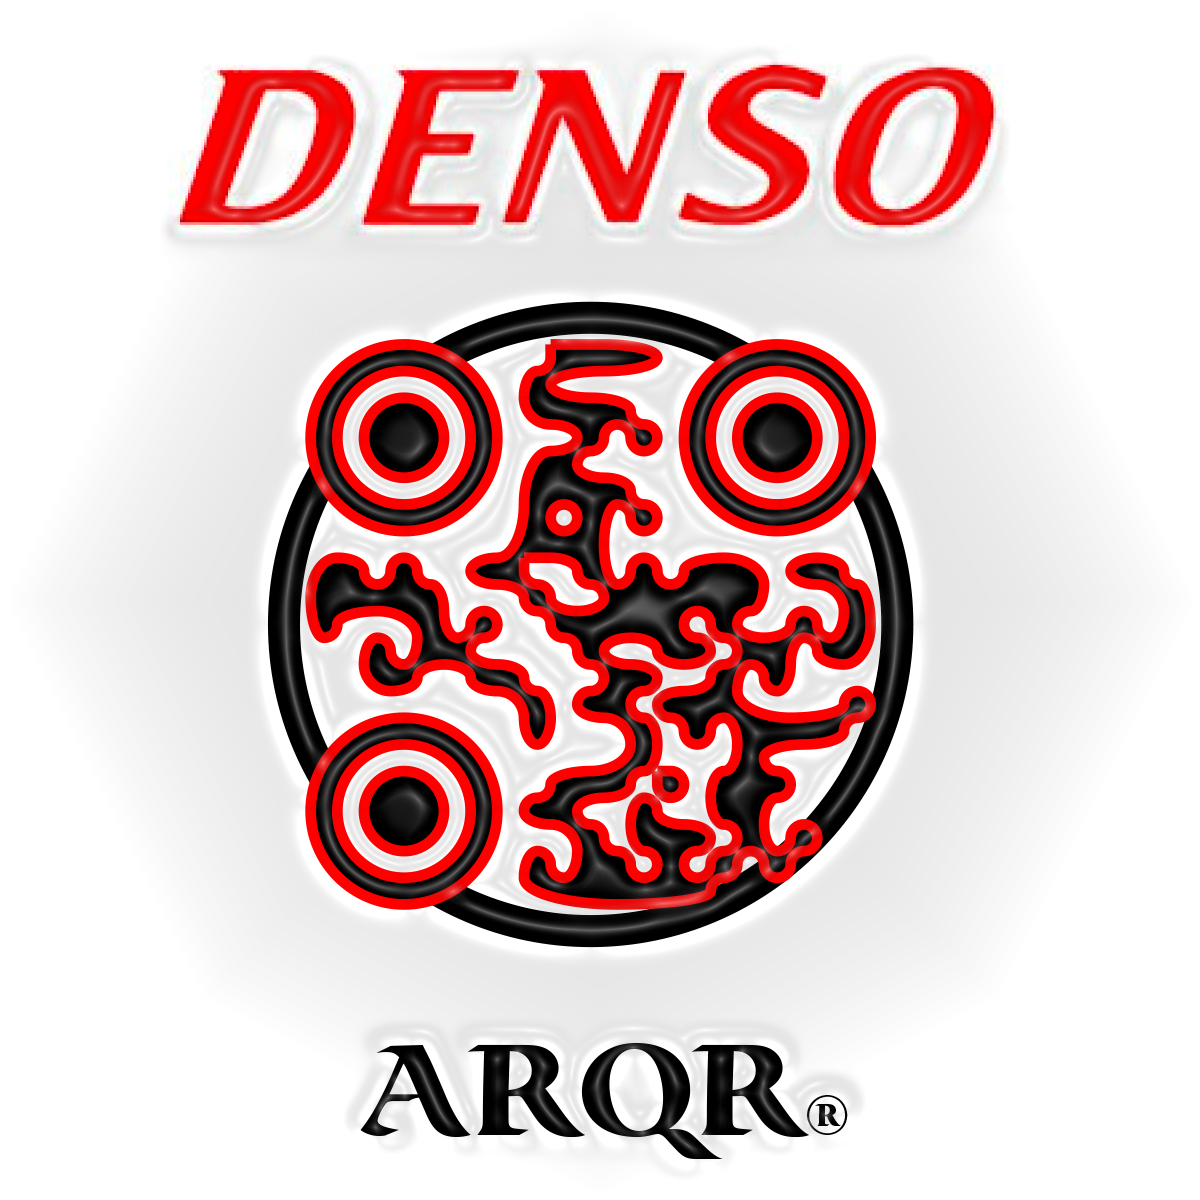 Denso Wave ARQR Code by Laird Marynick links to densowave.arqr.com